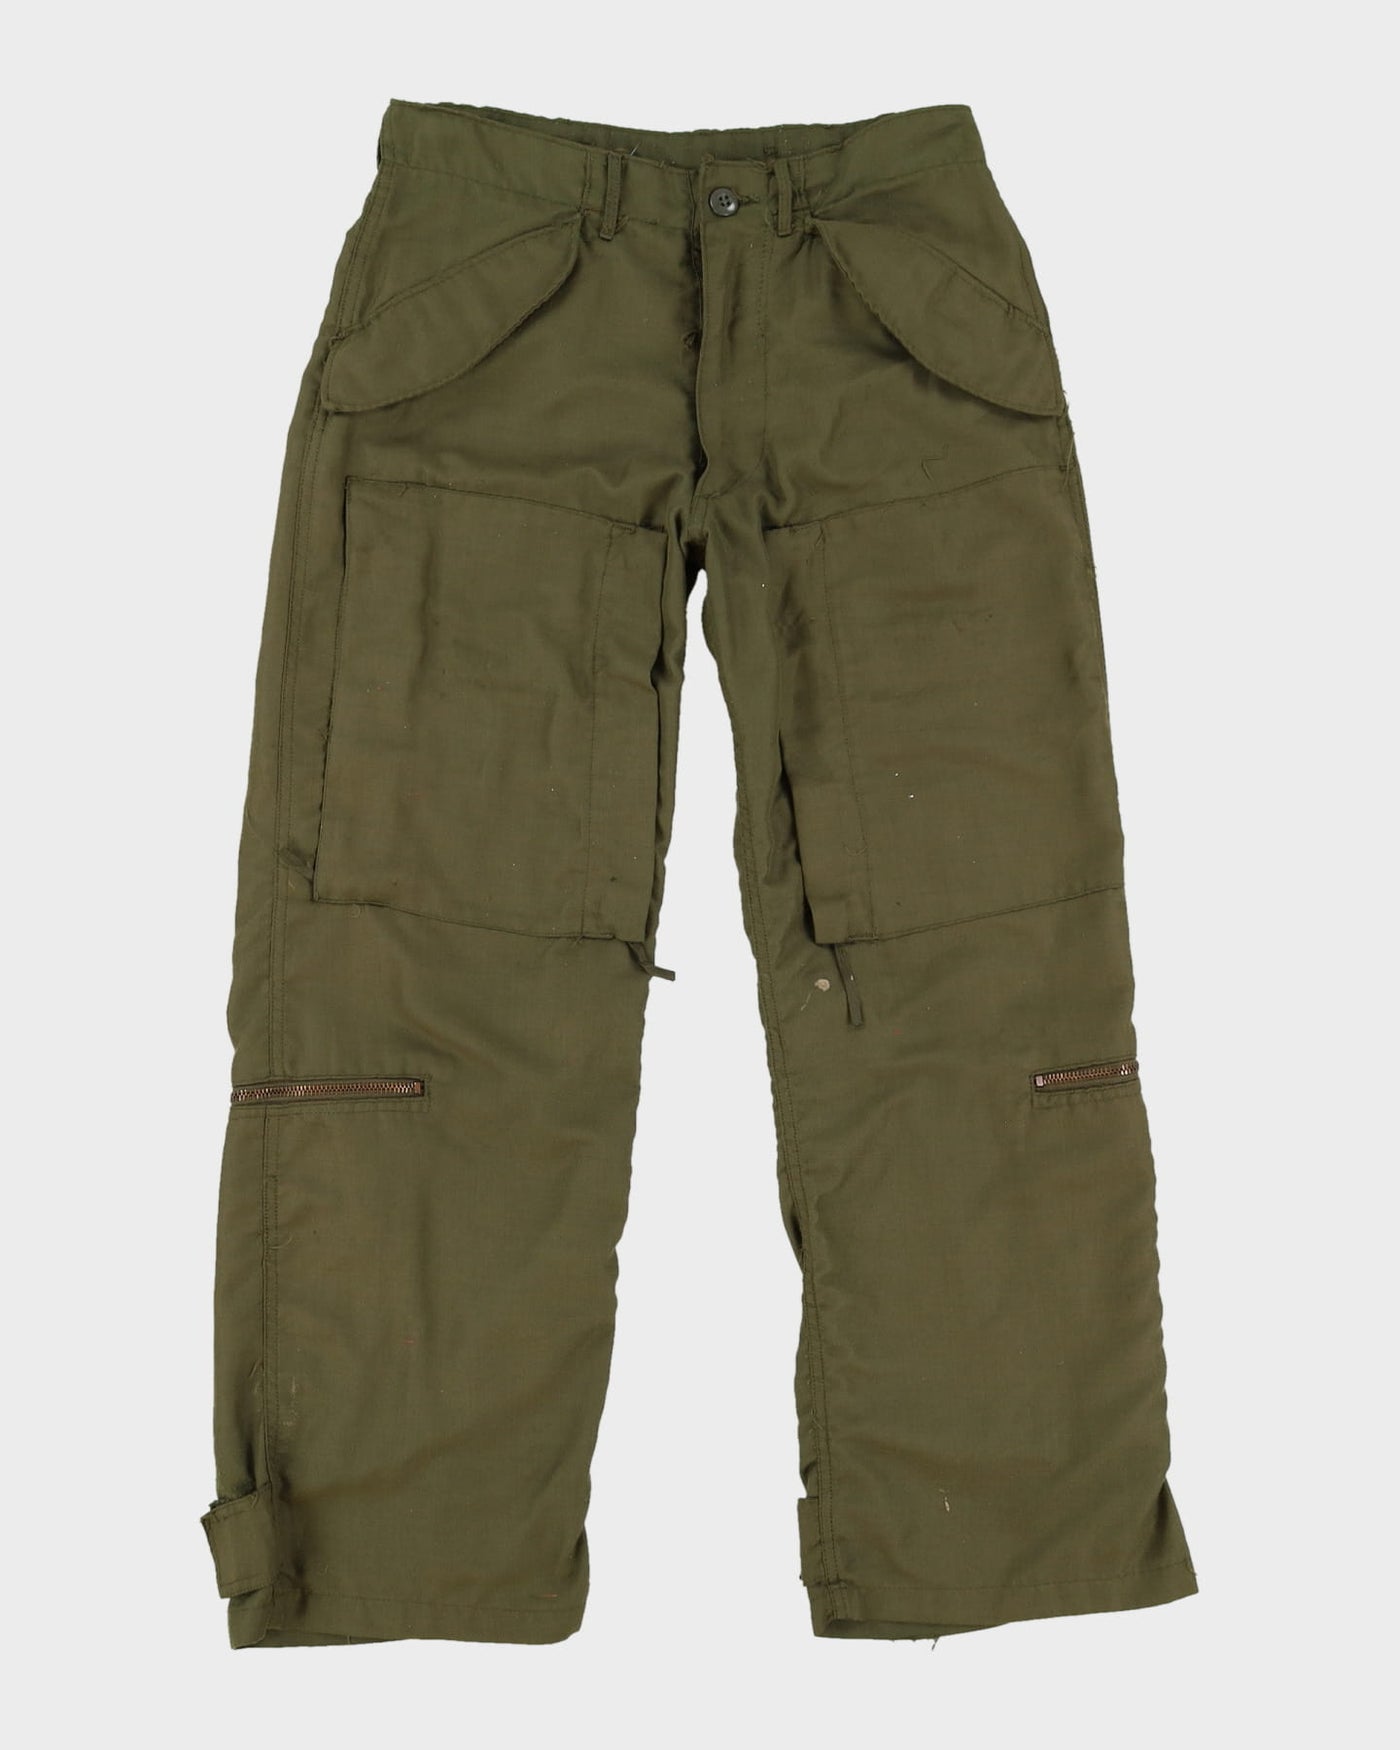 1971 Vietnam War Vintage US Army Helicopter Pilot Nomex Trousers - 30x28